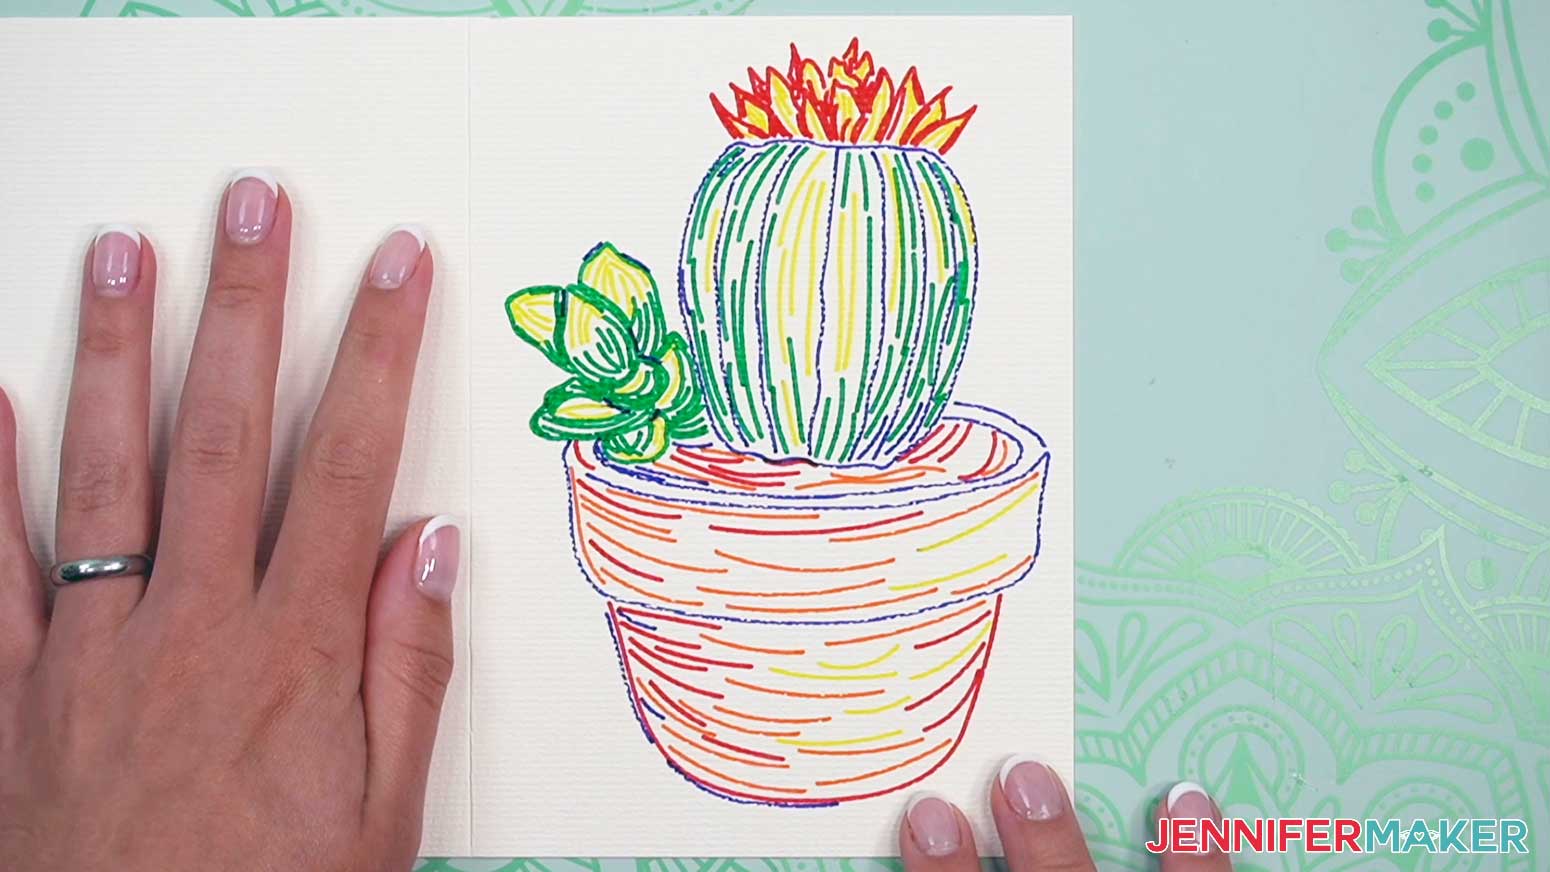 The watercolor cactus is drawn and ready to be filled in with the watercolor brush.